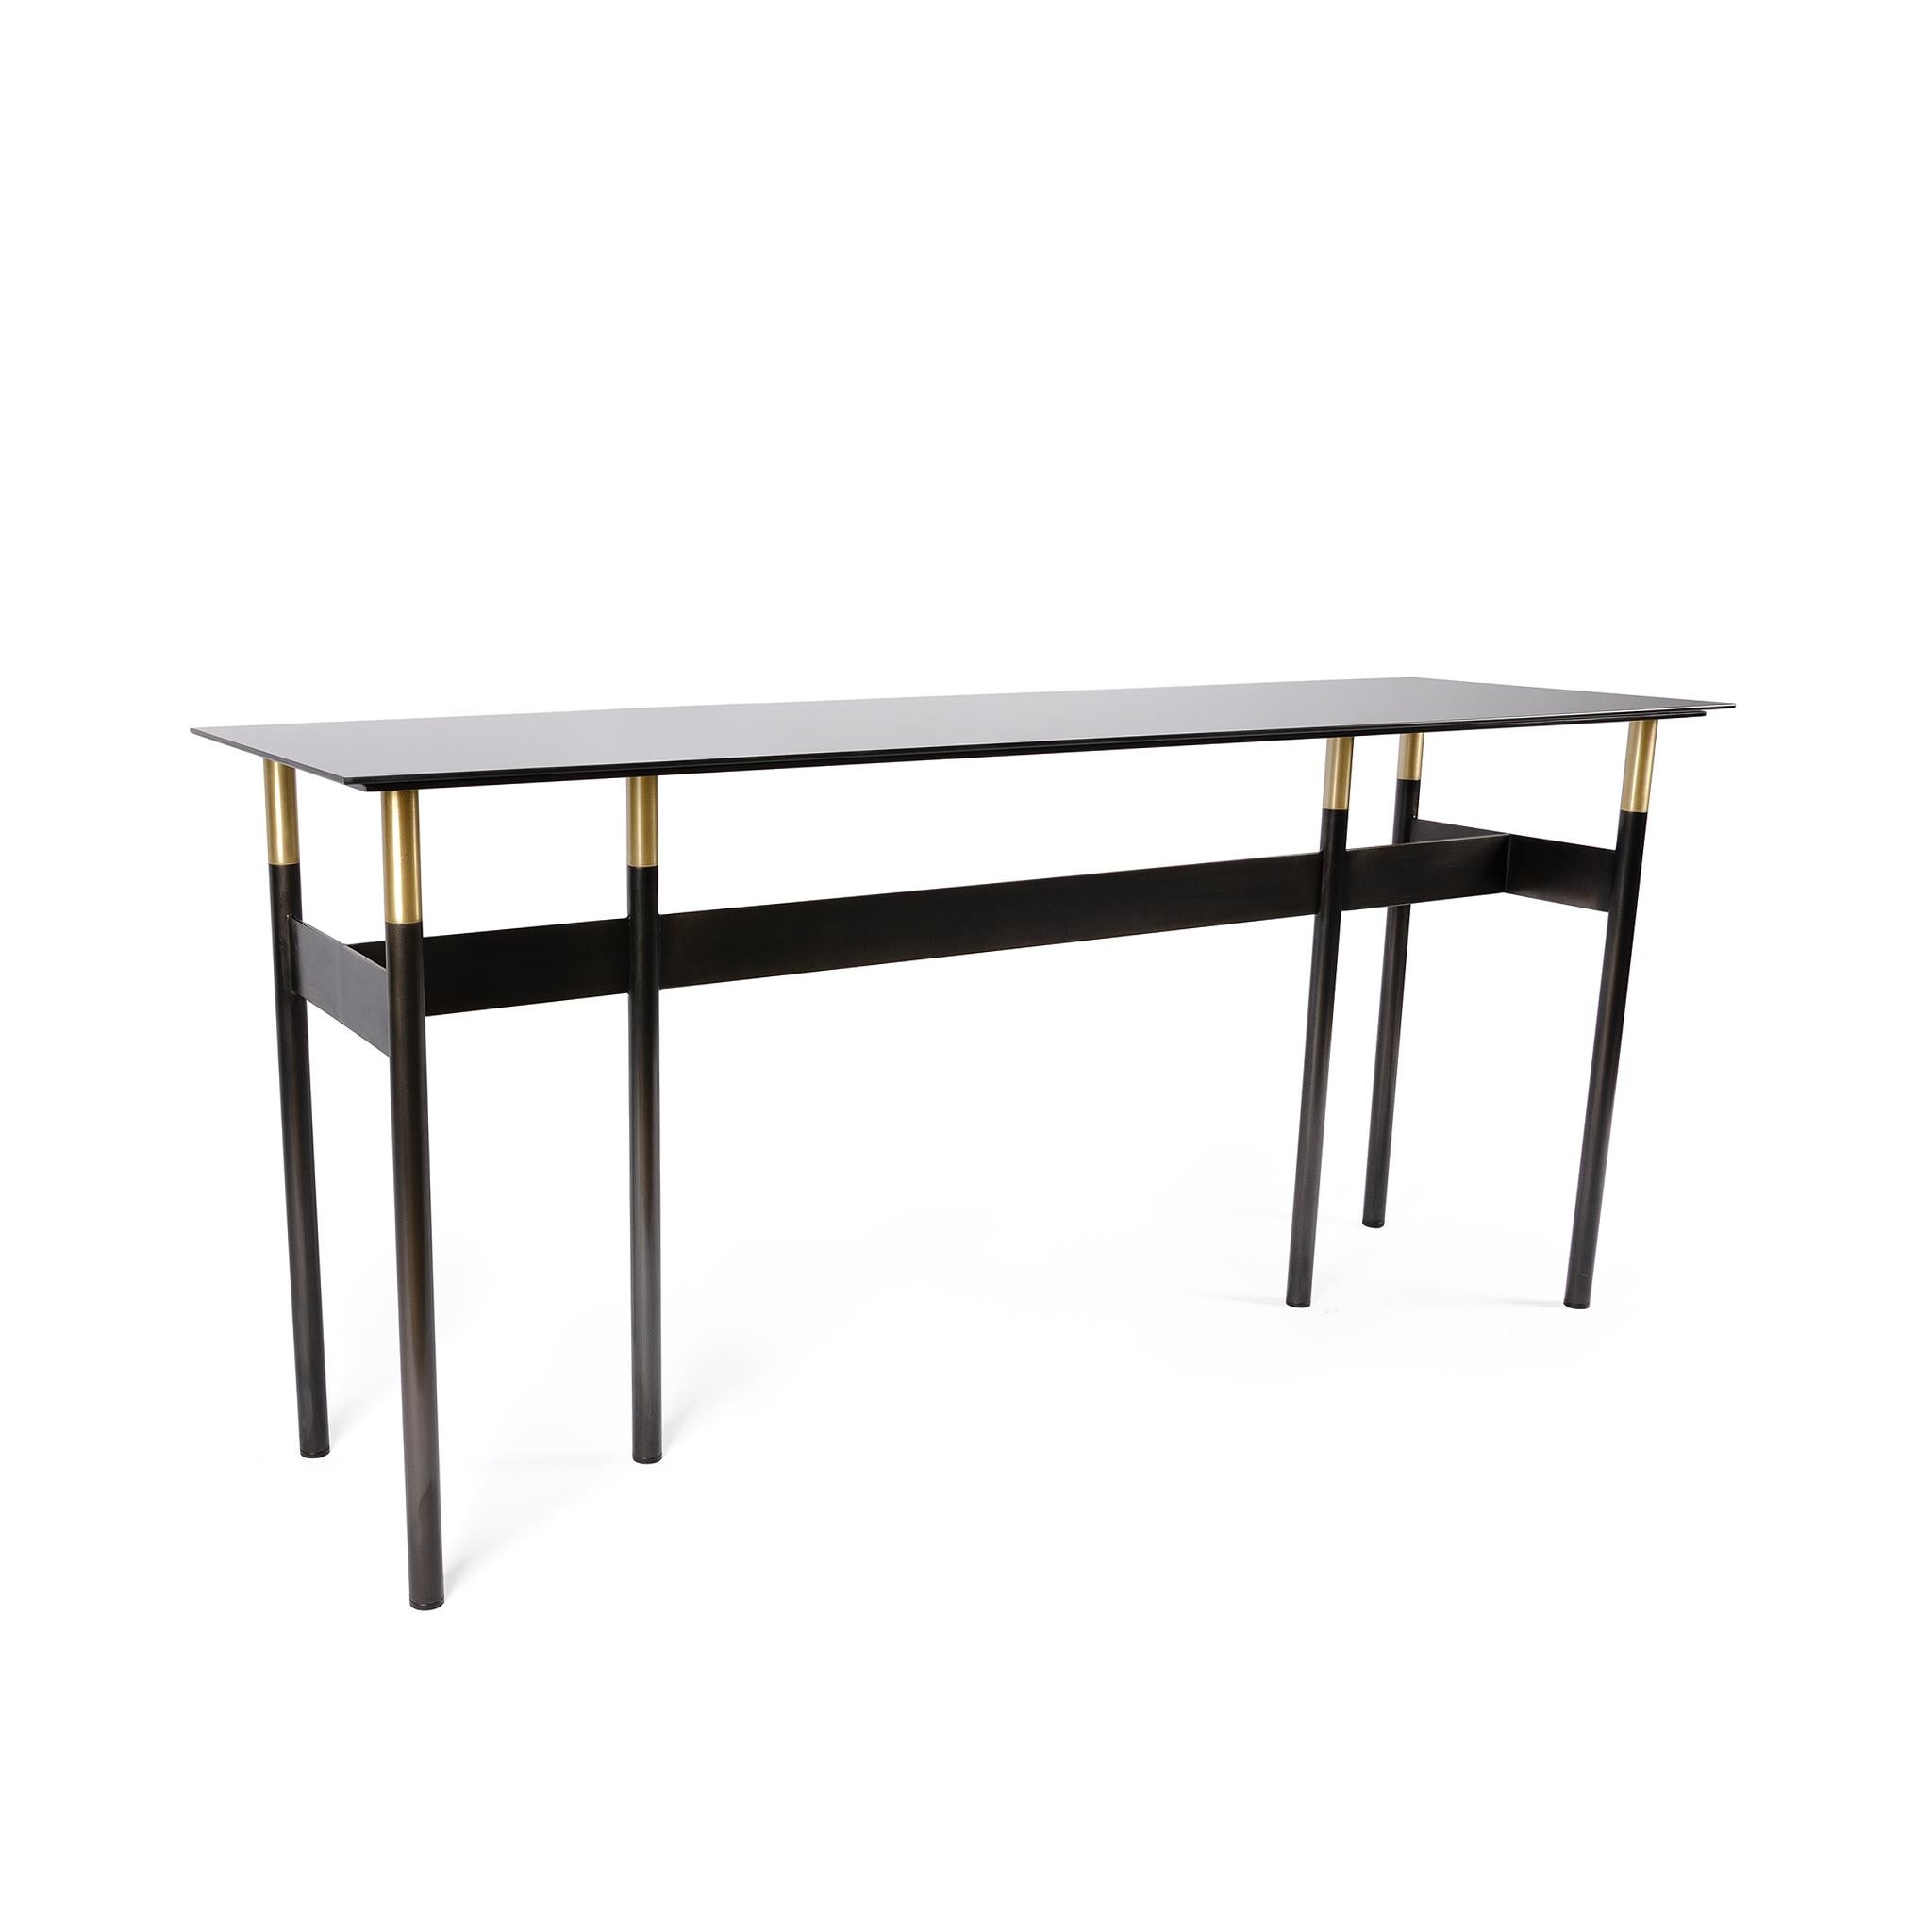 The lank table is rectangular console table with an unassuming elegance. Its dark tones of the linear blackened hand finish steel and tinted mirror glass top contrast against the bright brass details for a unique and sophisticated table. This